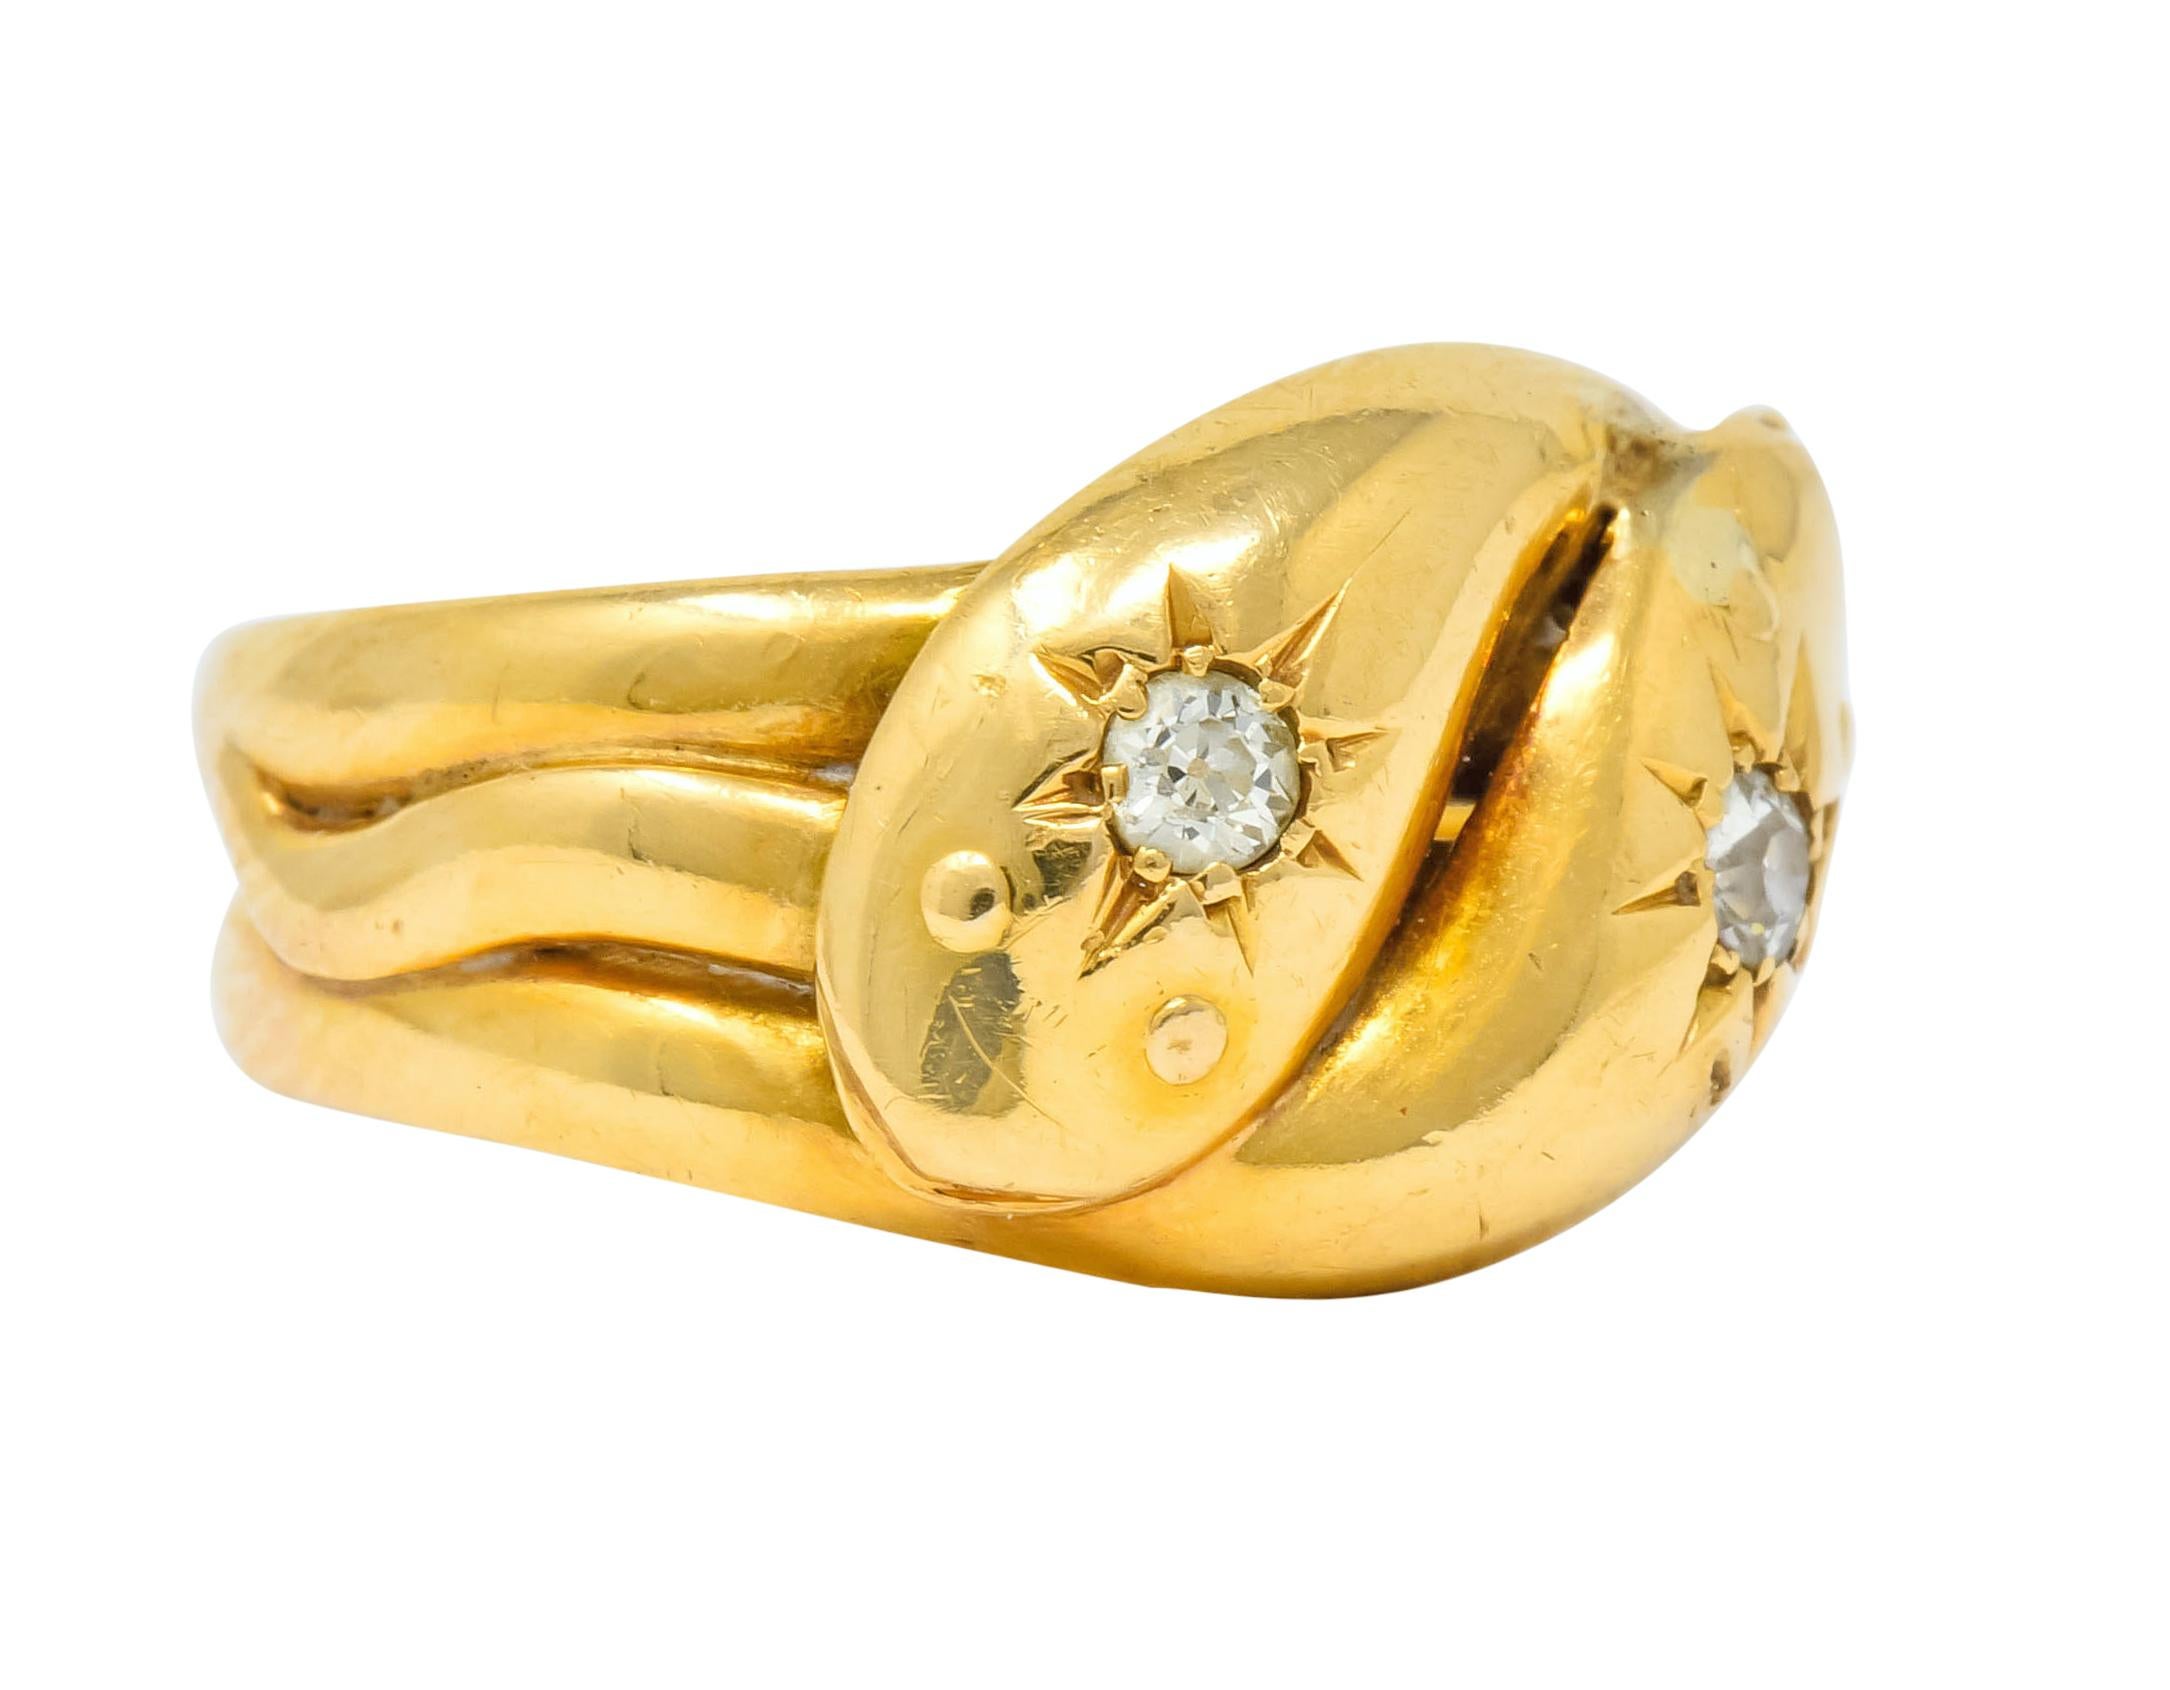 Band style ring designed as two coiled snakes with bodies forming a wide band tapering from three to two sections

Each snake head featuring a graver set old mine cut diamond, eye clean and white

With British hallmarks for 18 karat gold

Ring Size: